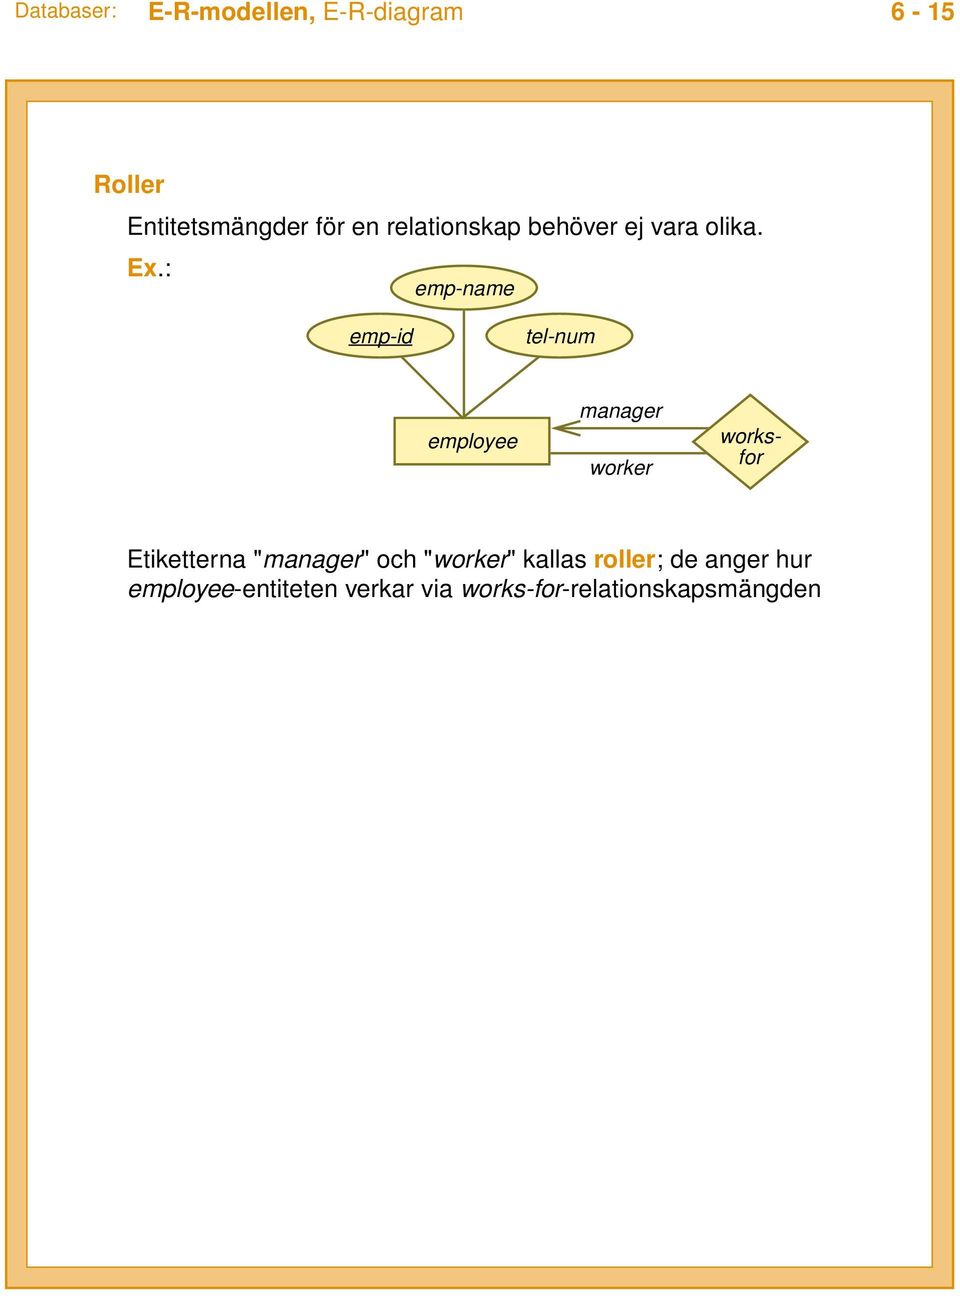 : emp-name works- for emp-id tel-num manager worker Etiketterna